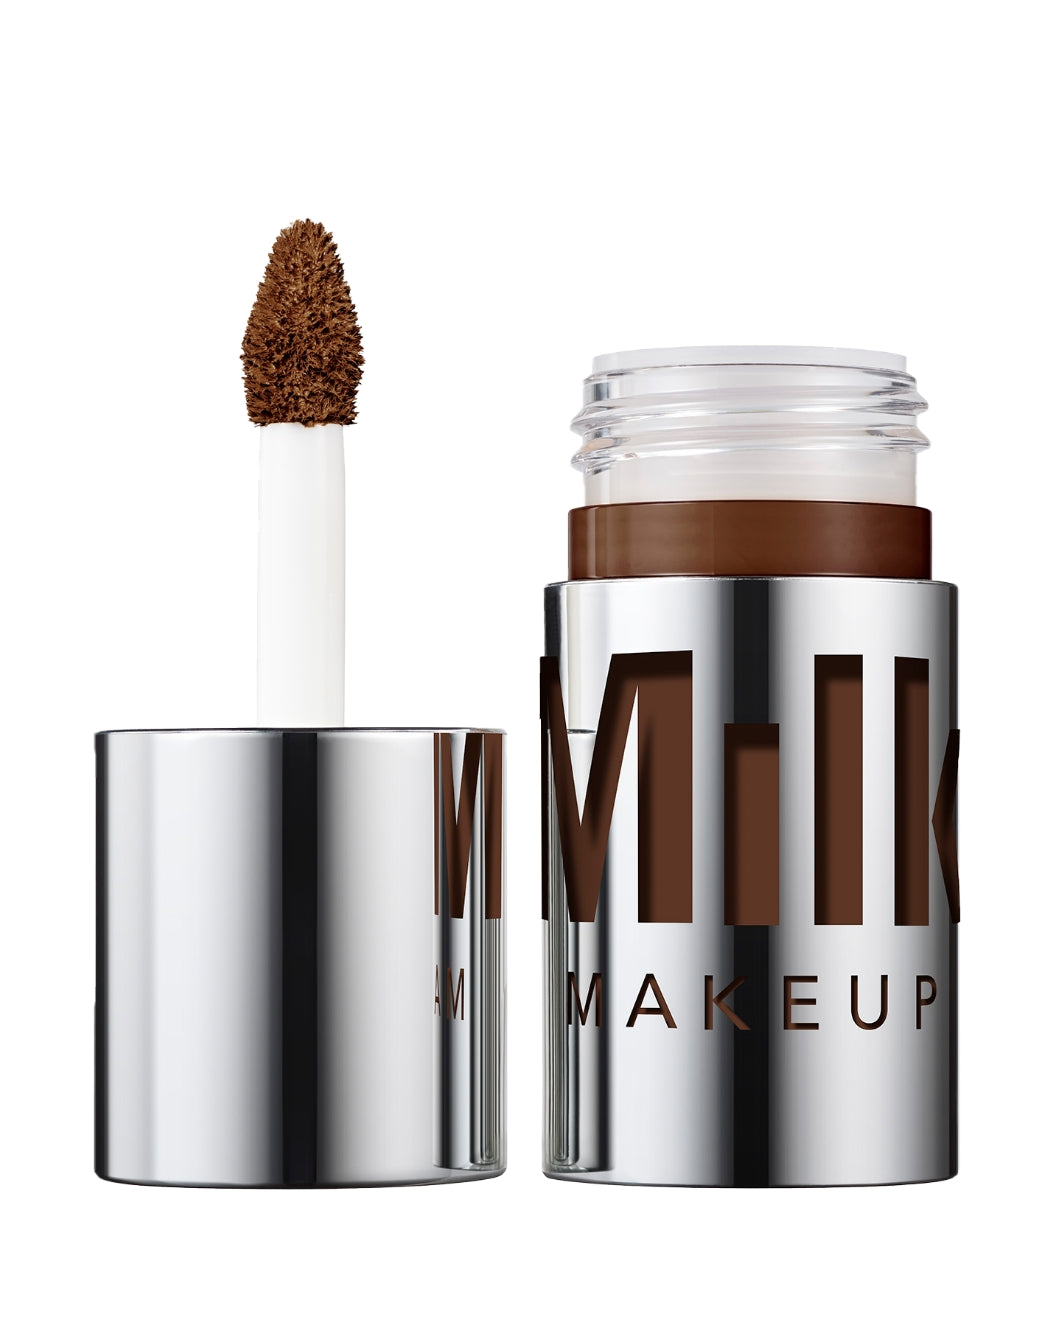 Bottle of Milk Makeup Future Fluid All Over Cream Concealer on a white background